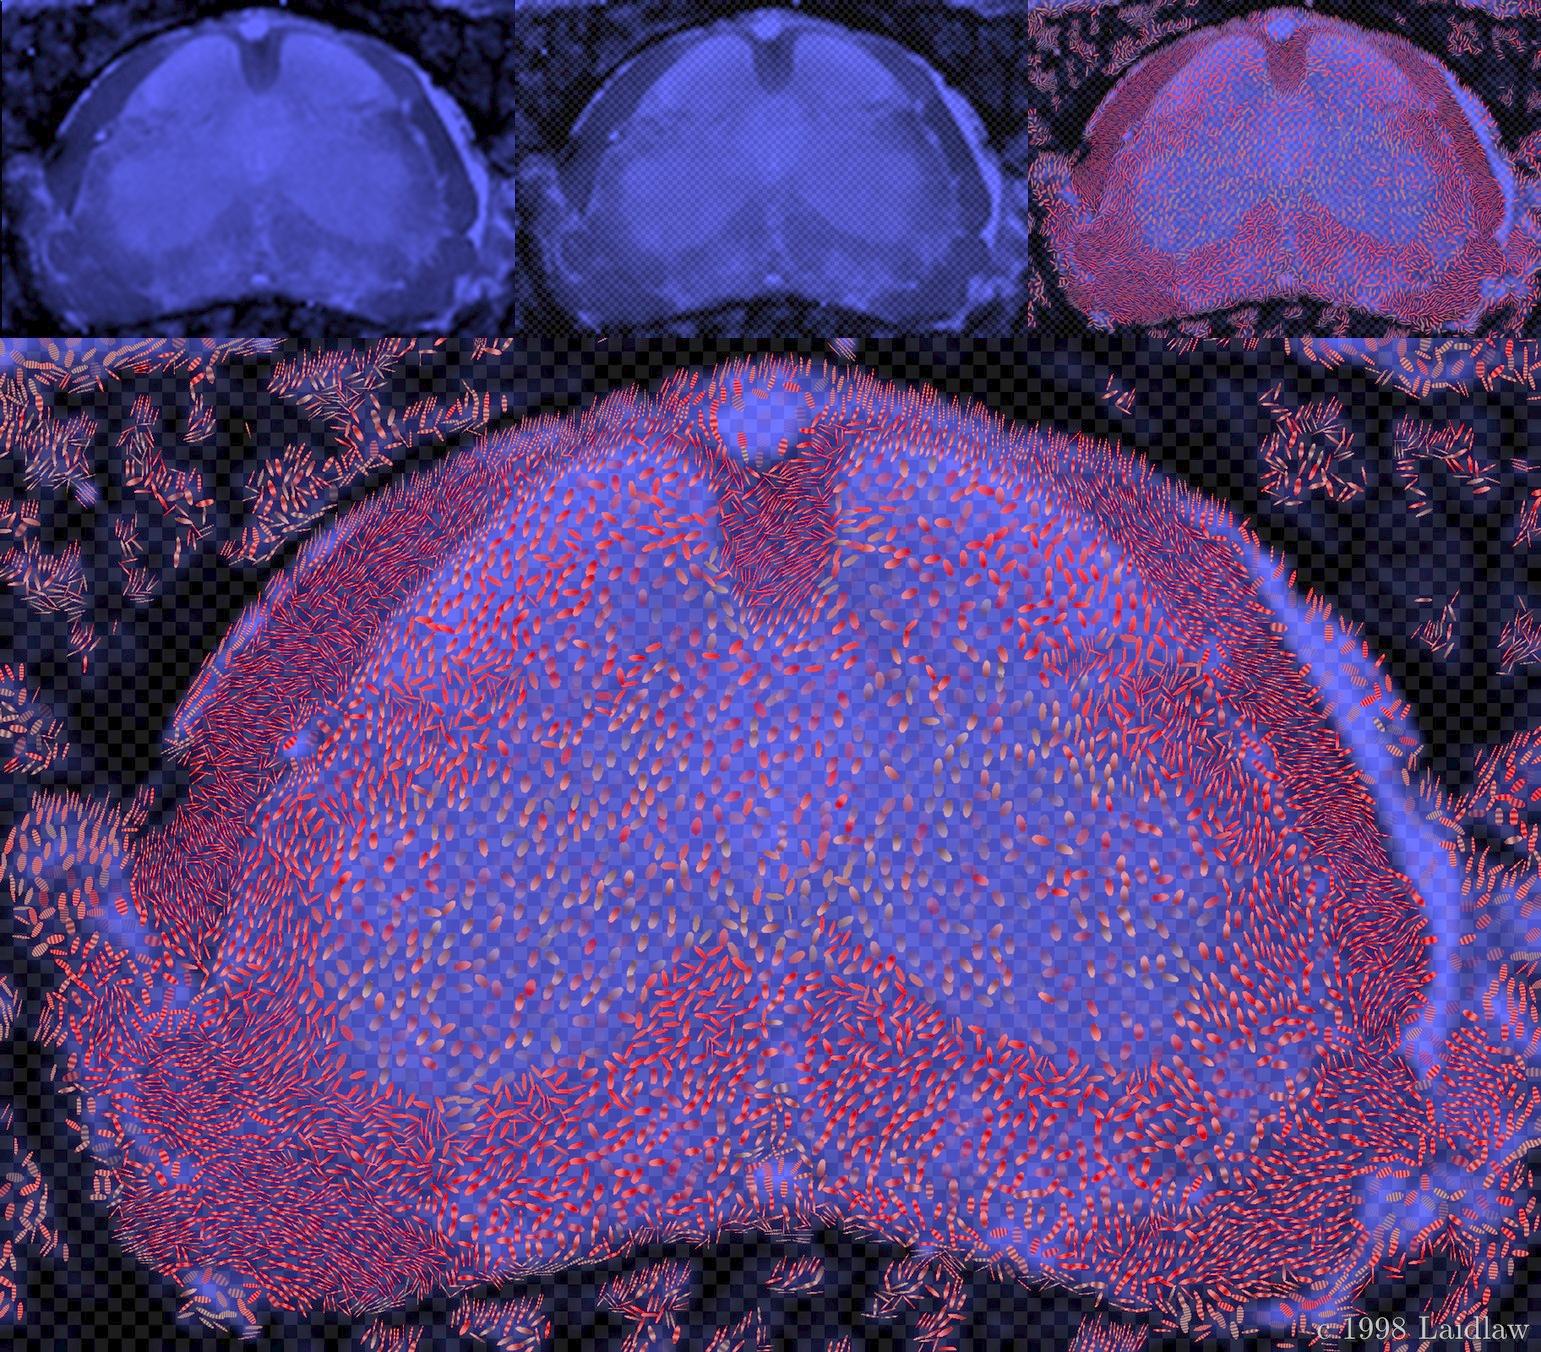 Mouse spinal chord MRI images visualized as impressionist paintings